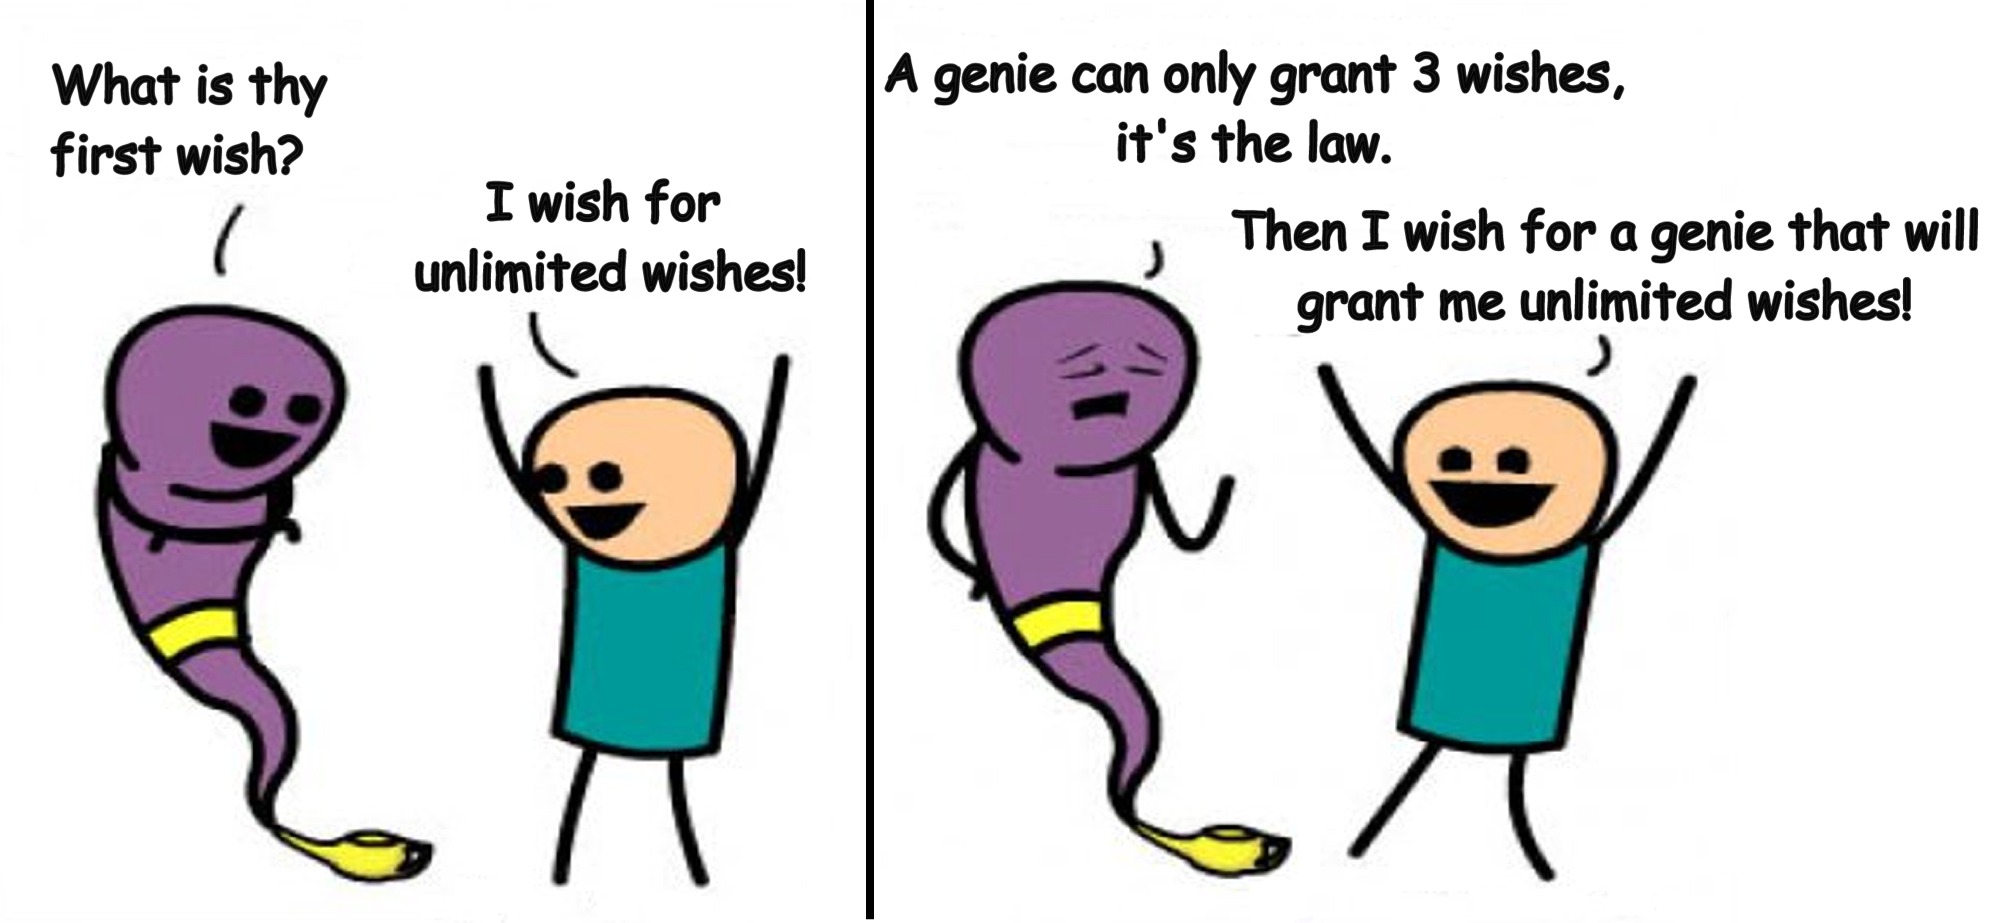 cartoon - What is thy first wish? I wish for unlimited wishes! A genie can only grant 3 wishes, it's the law. Then I wish for a genie that will grant me unlimited wishes!